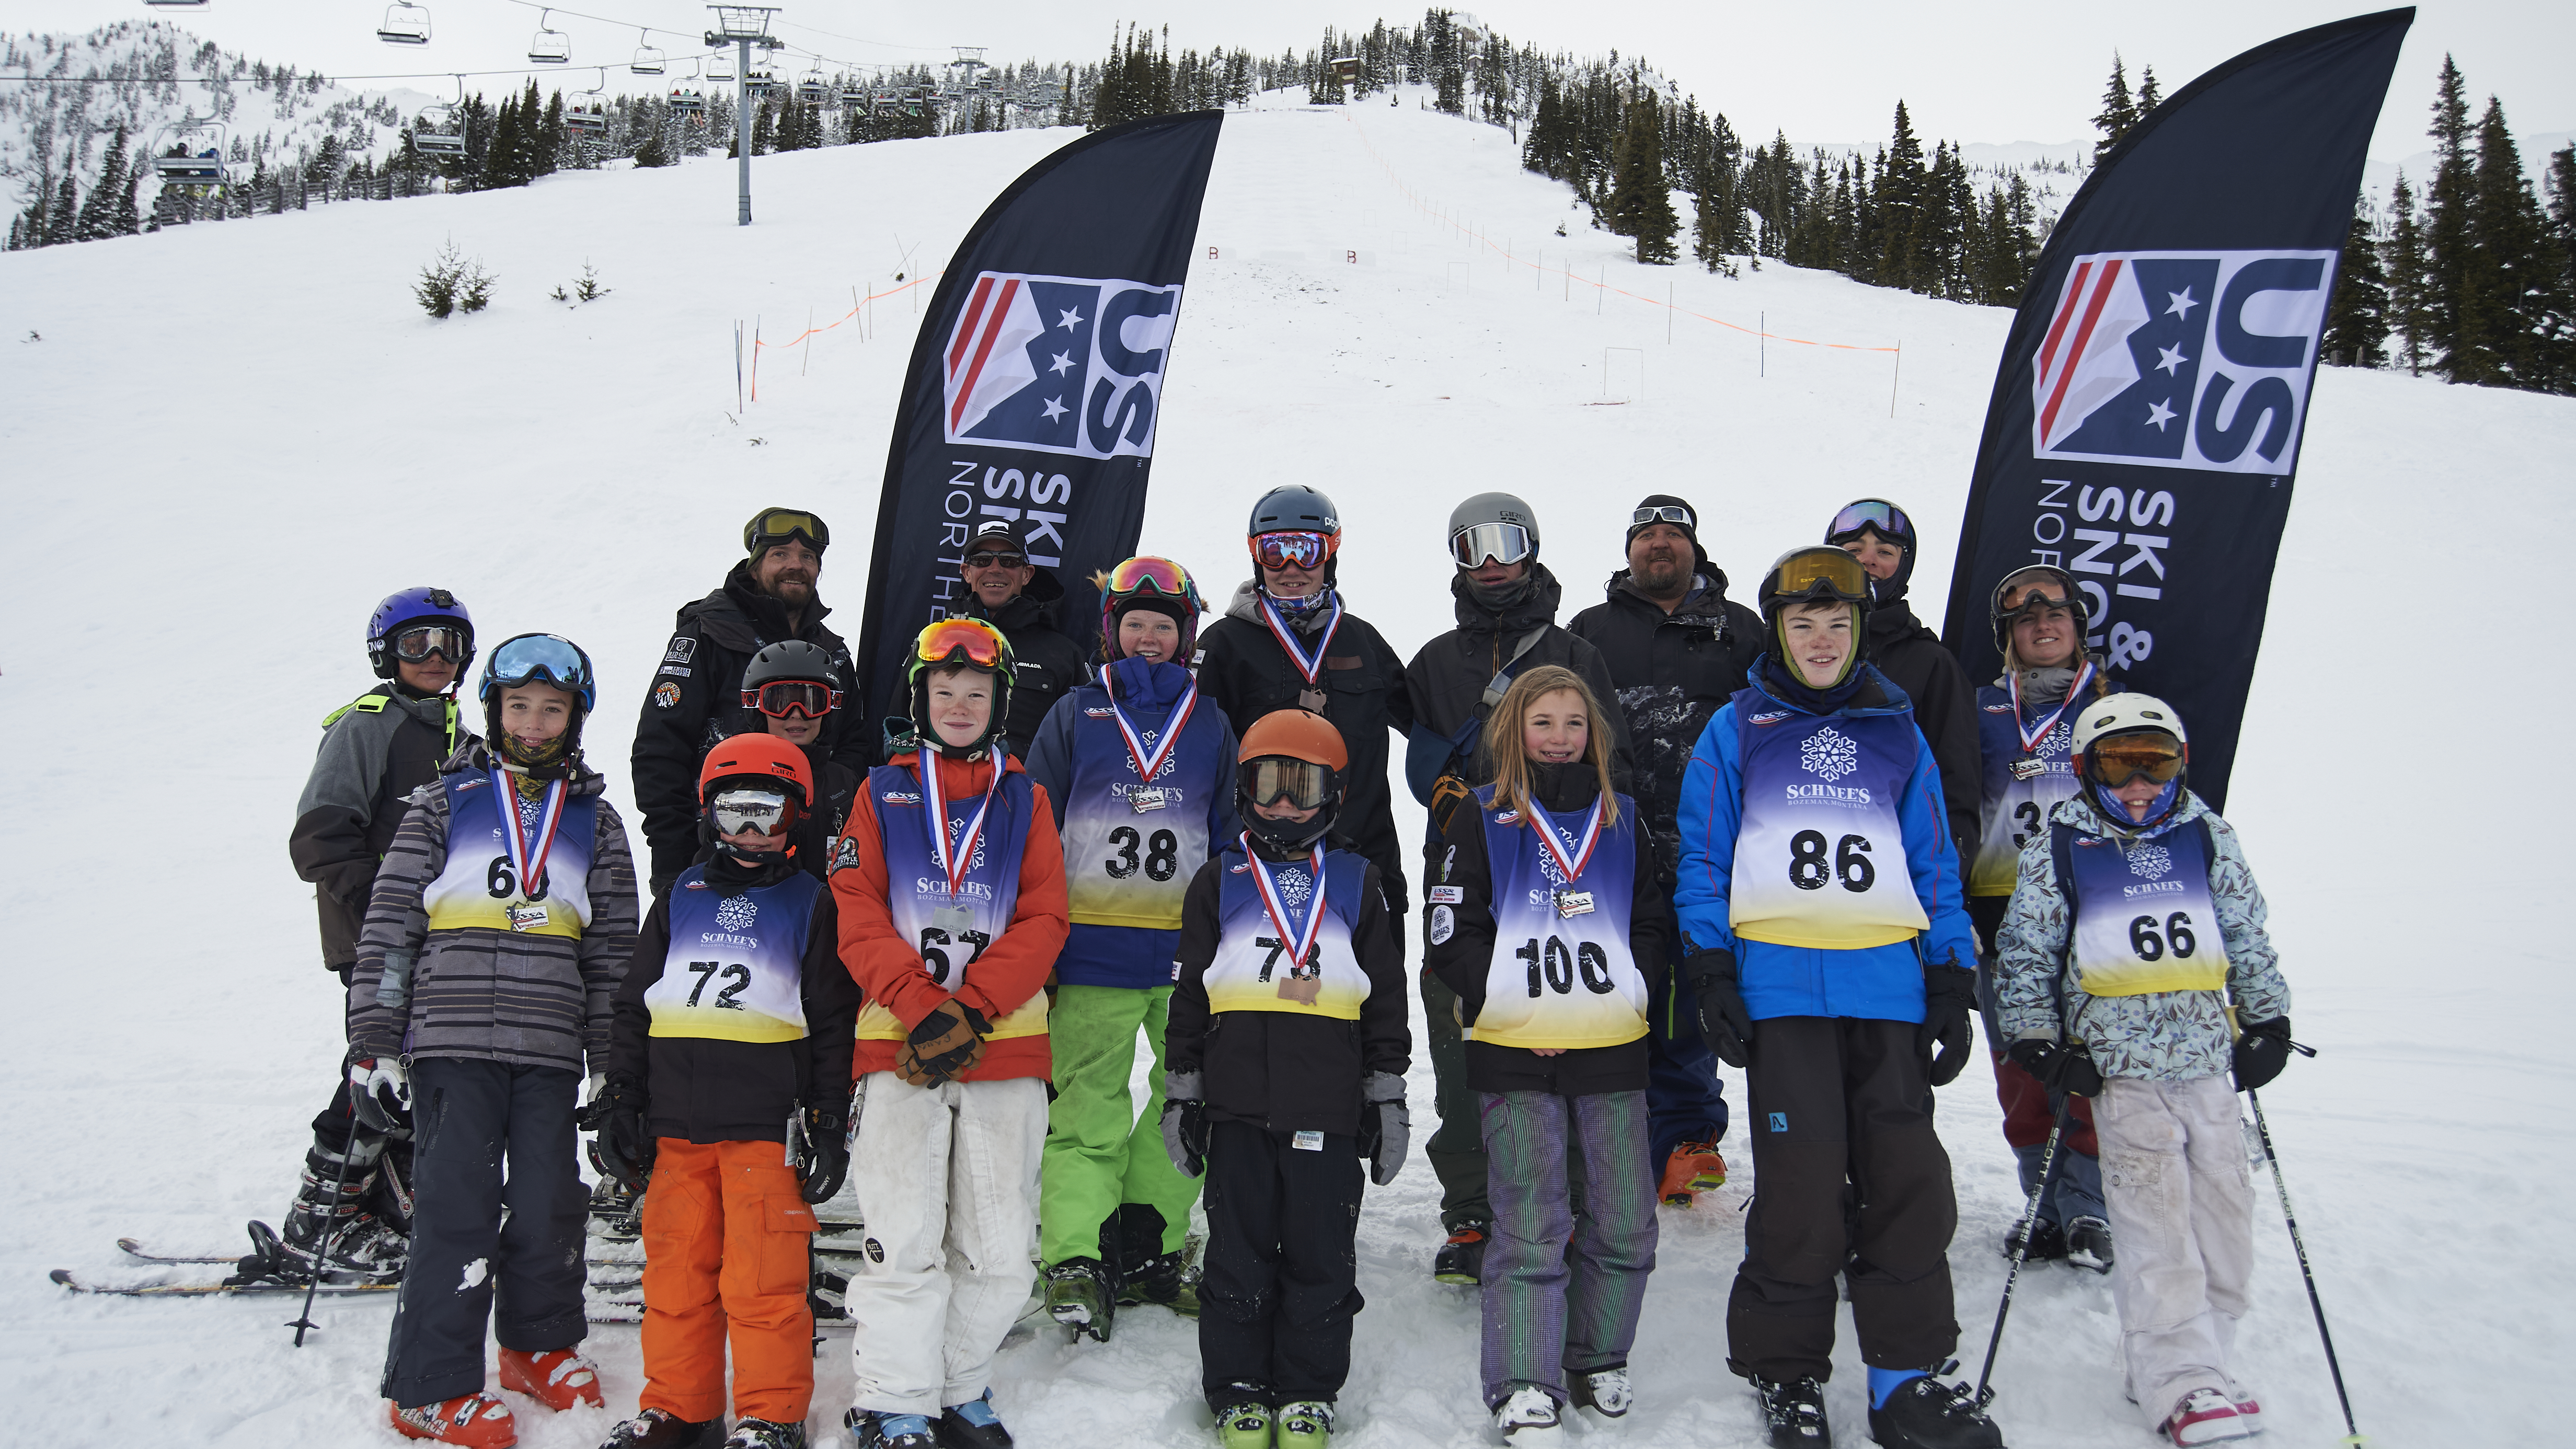 Medalists pose for a photo at the 2018 Northern Division Freestyle Championships at
Bridger Bowl, Montana. Photo credit: Kelly Gorham.